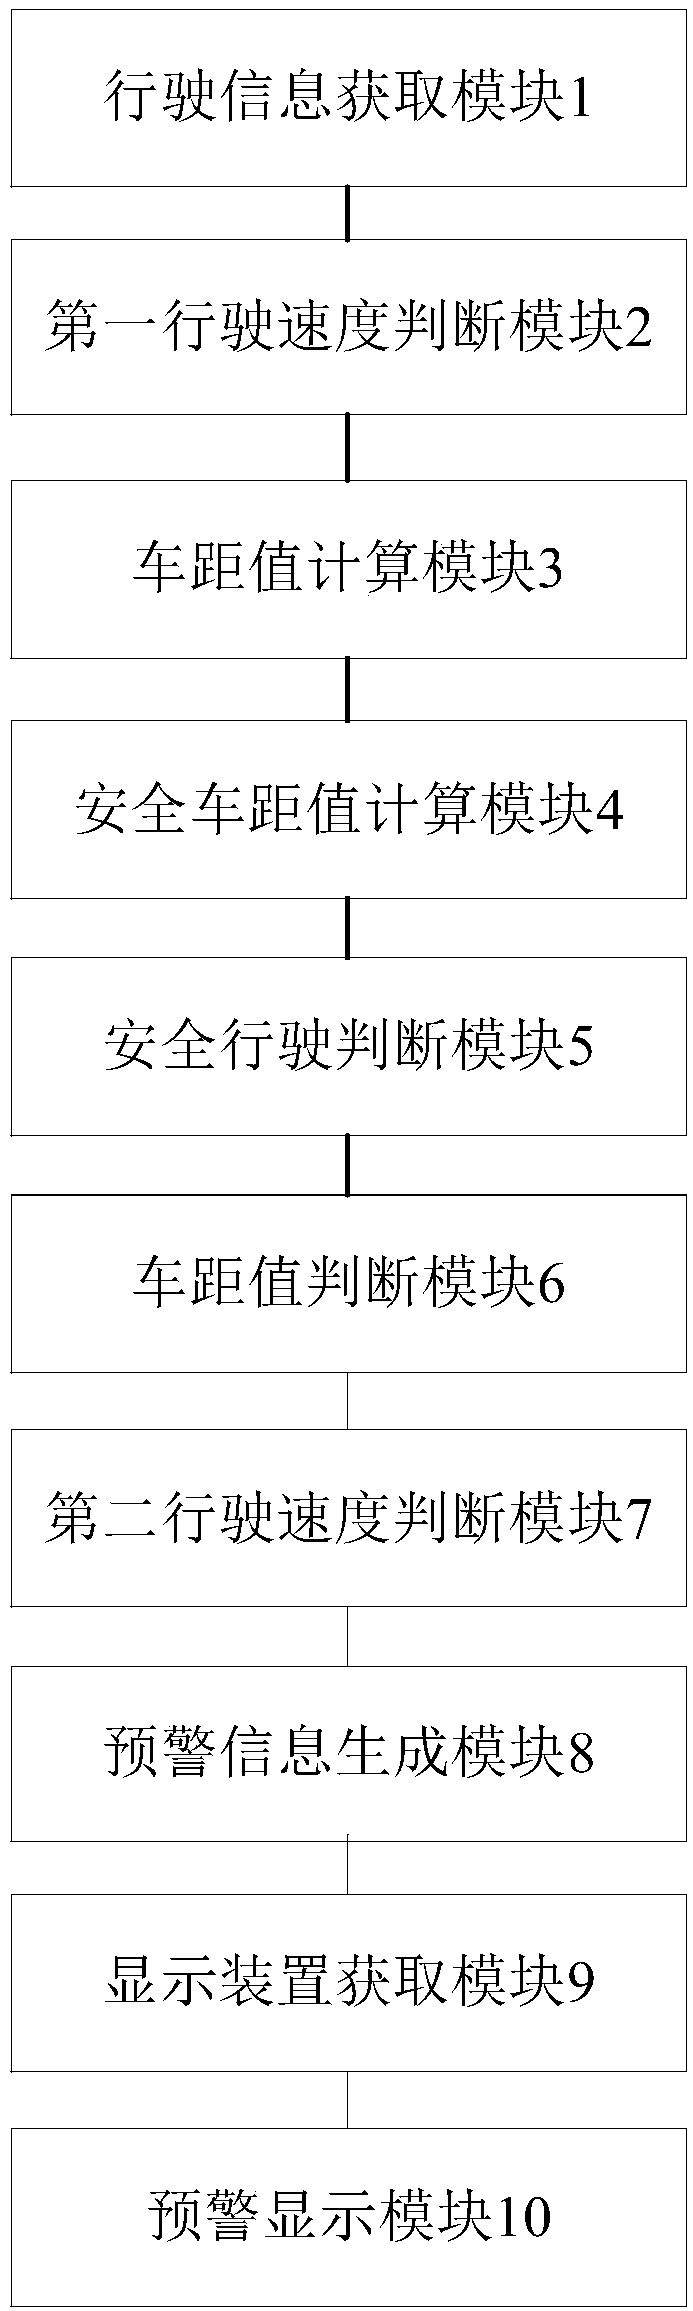 Method and system for preventing secondary traffic accidents on highway